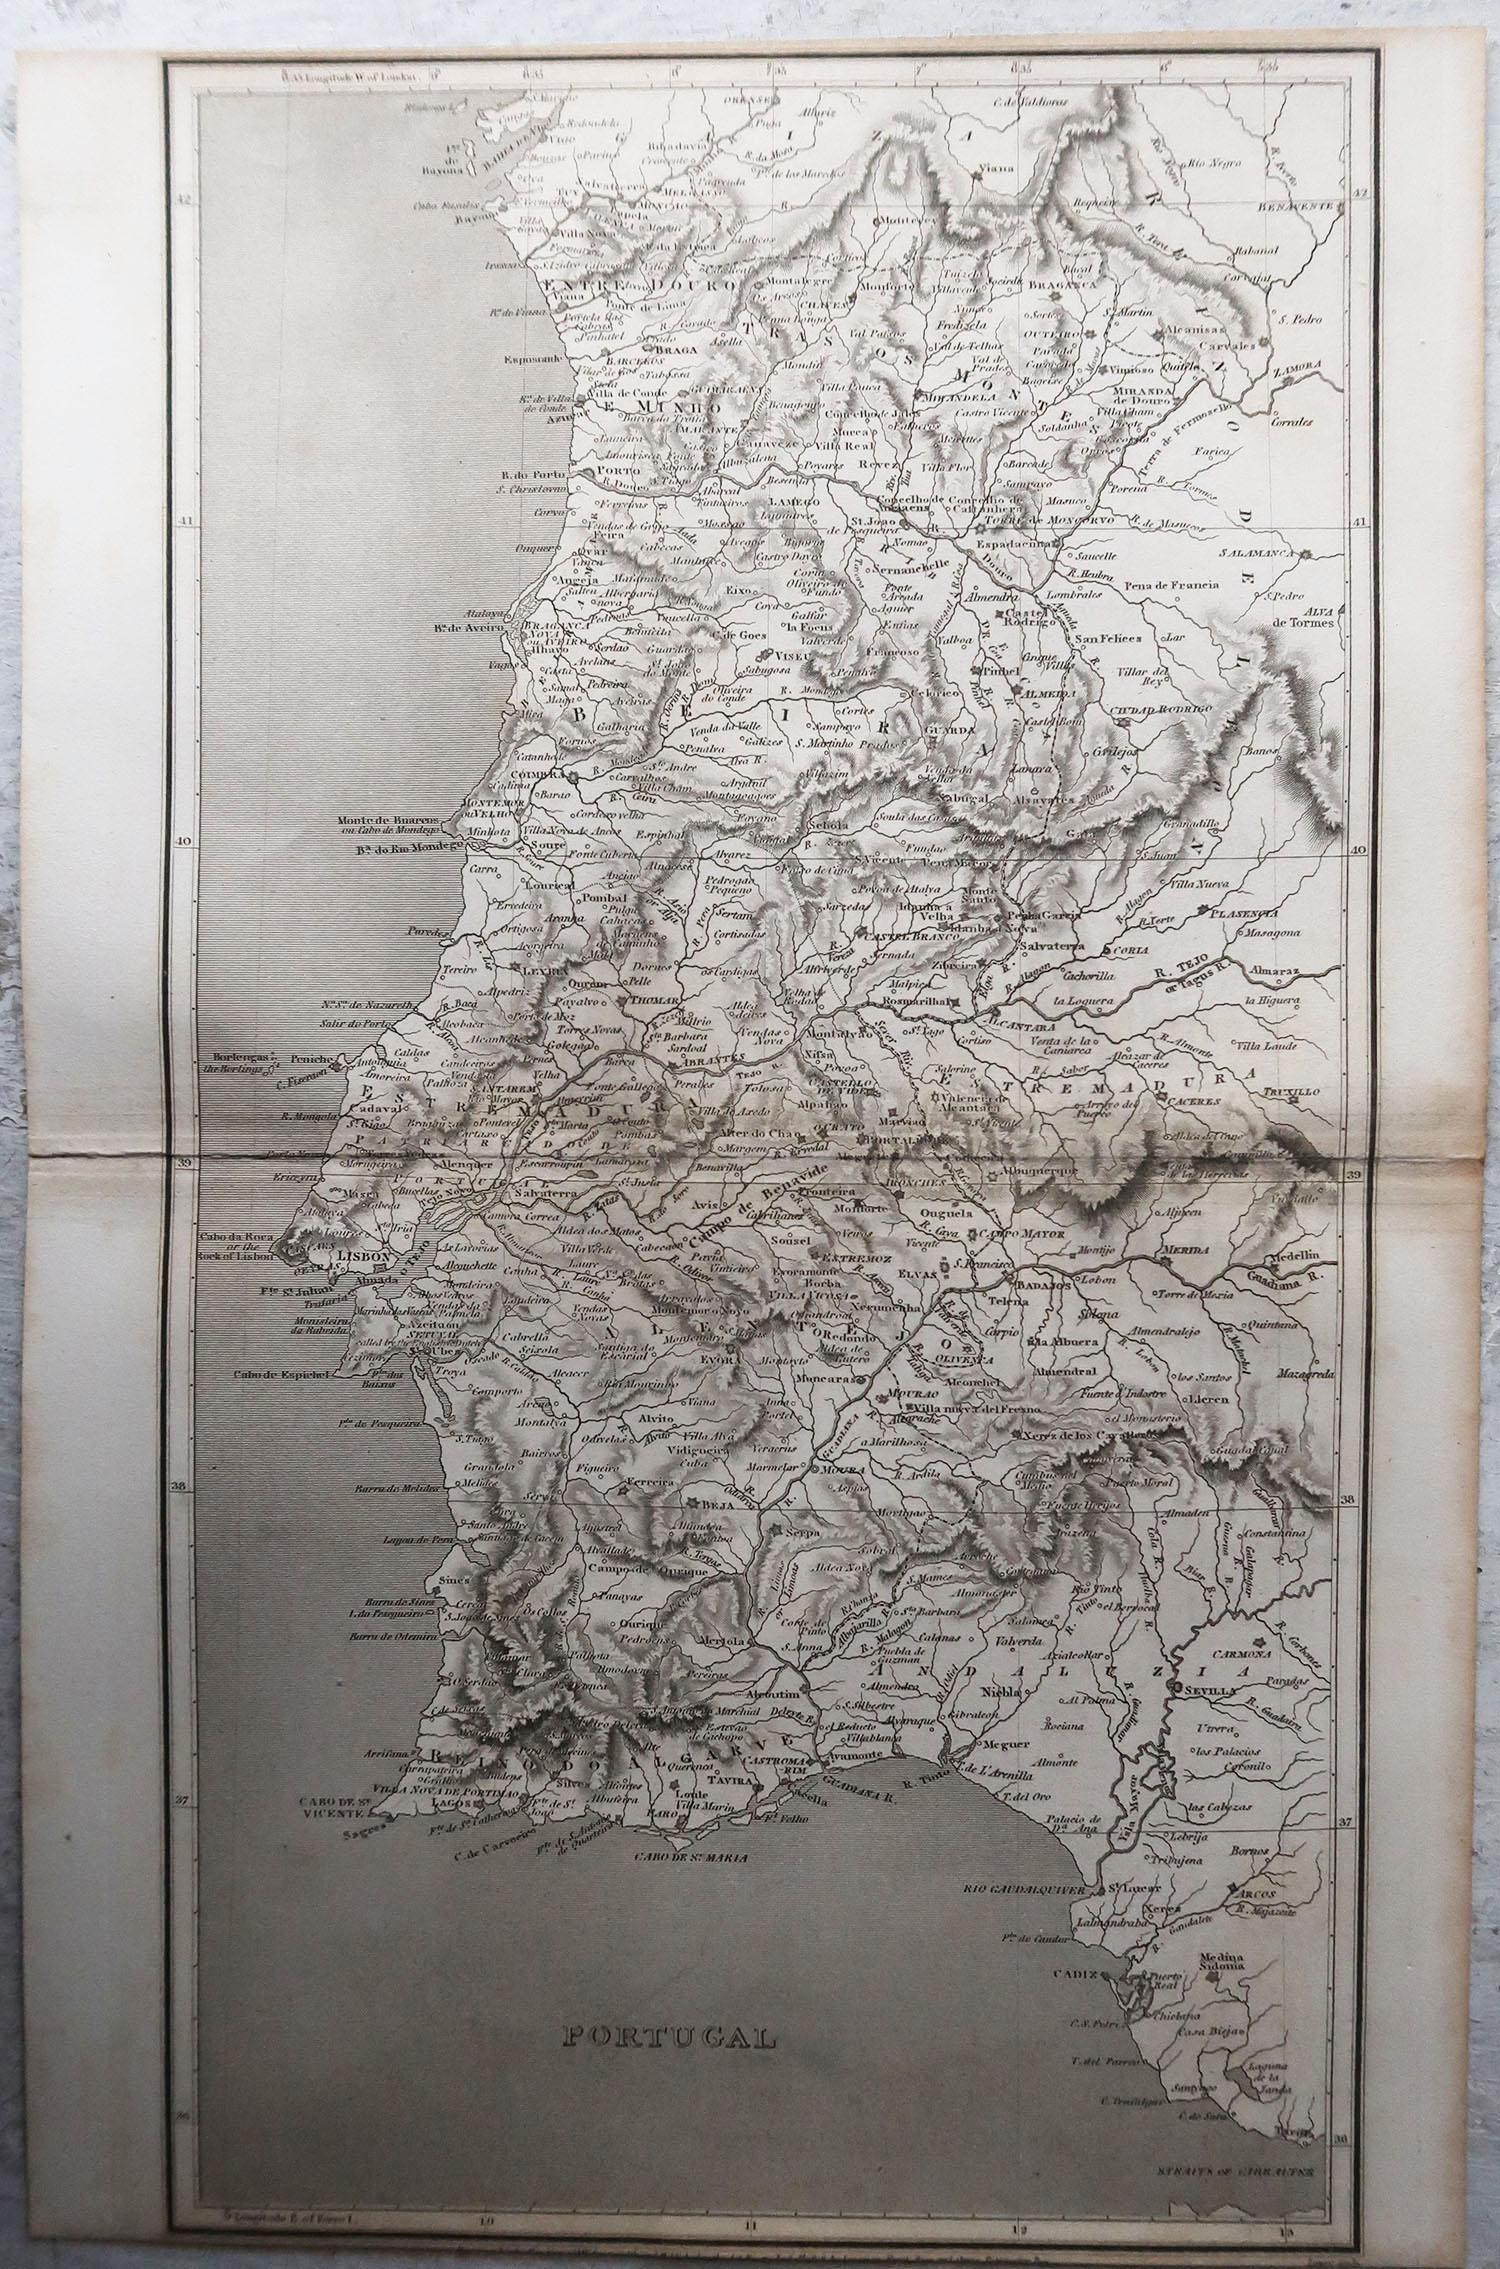 Other Original Antique Map of Portugal, Arrowsmith, 1820